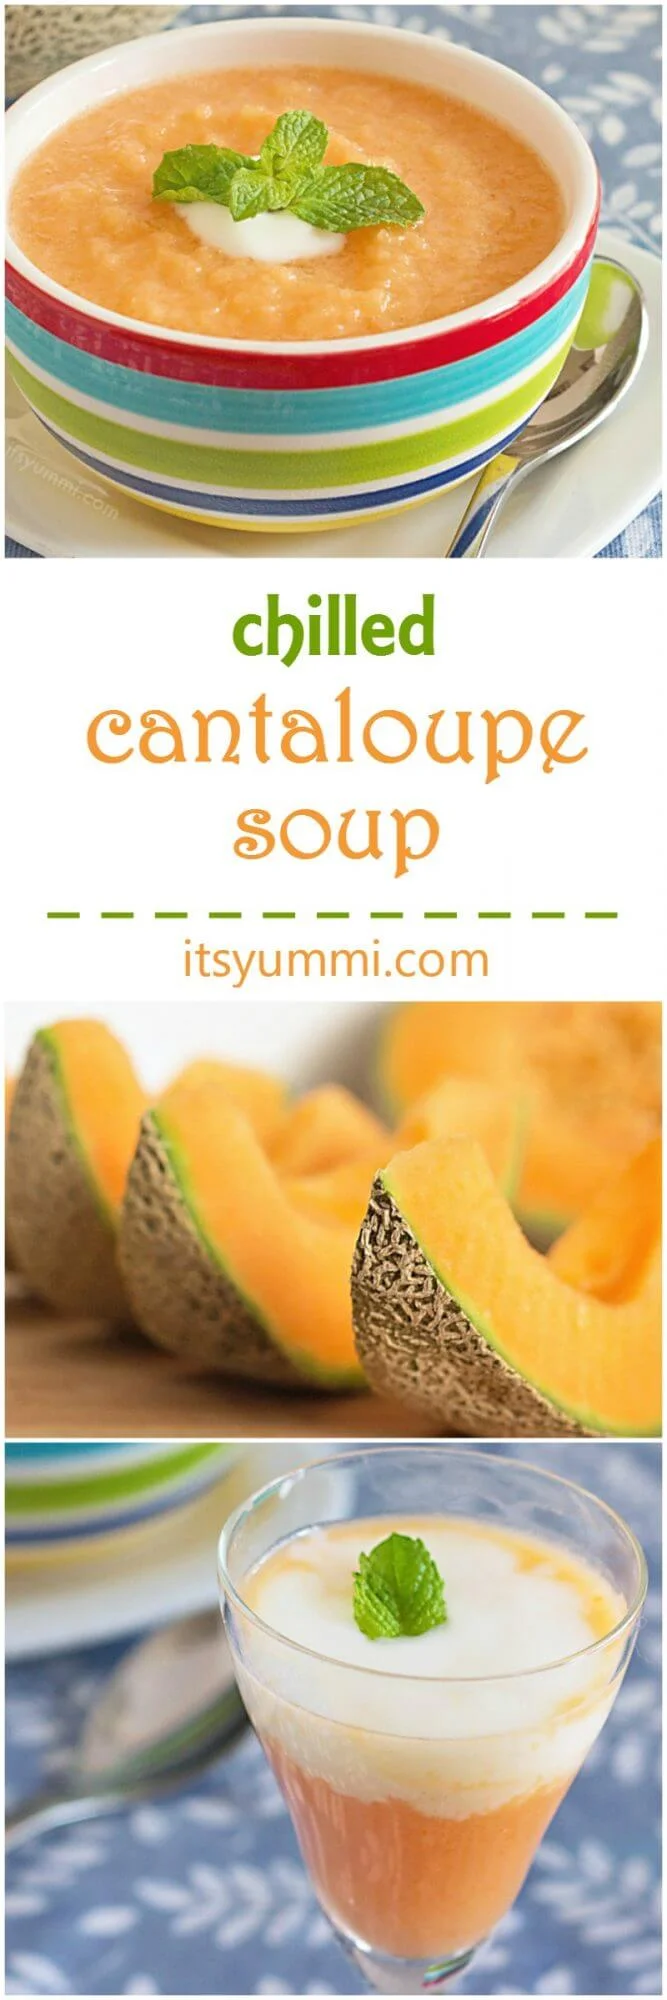 chilled cantaloupe soup photo collage